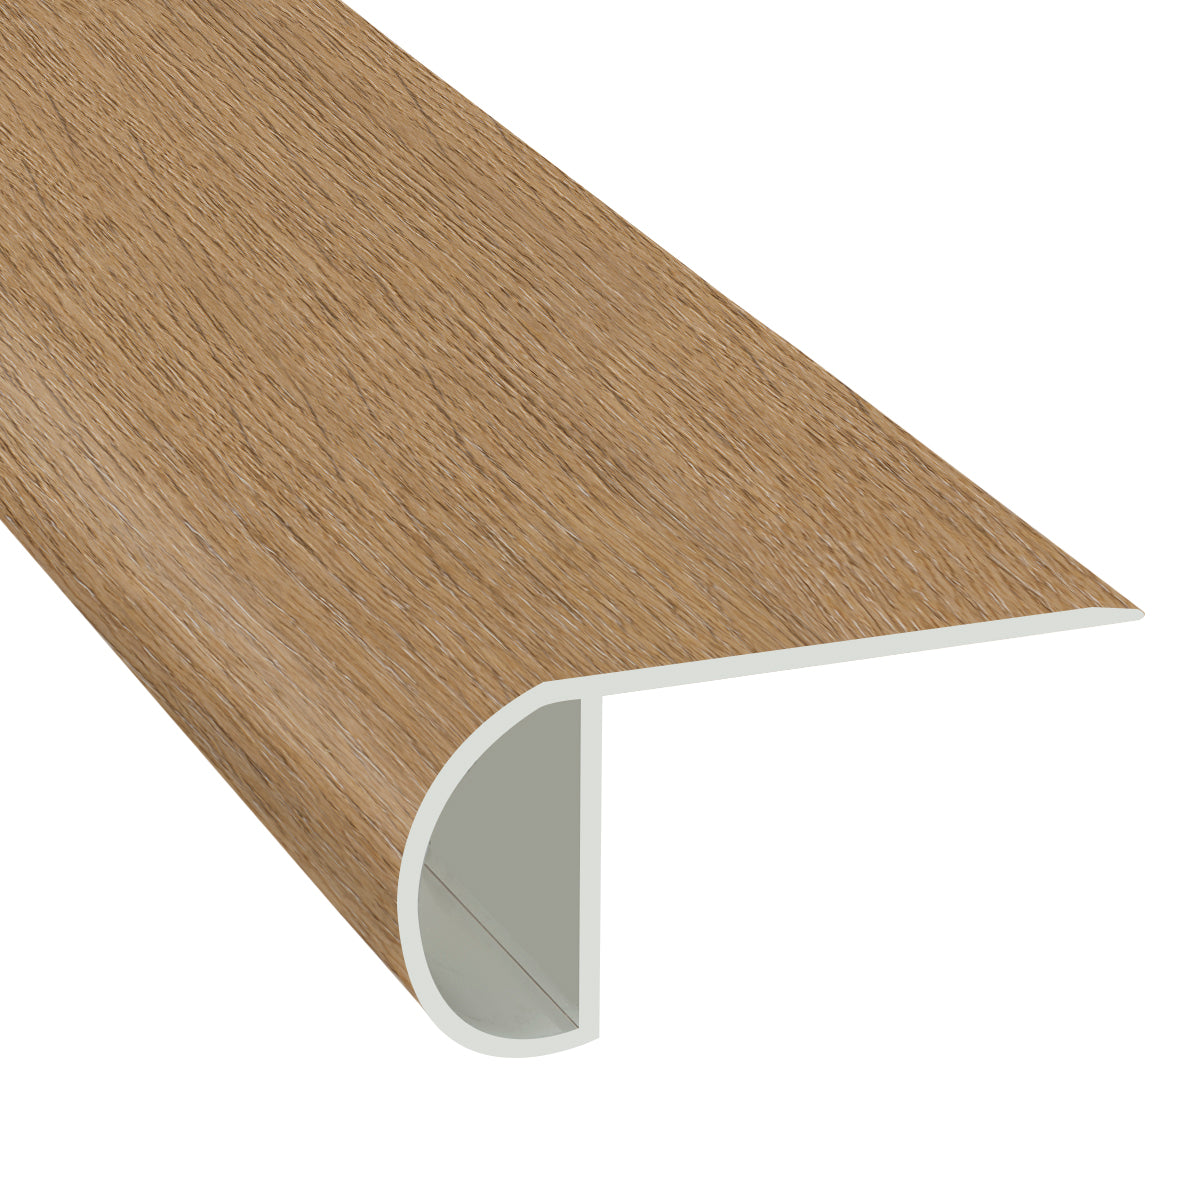 Butterscotch EIR 1.03 in. Thick x 2.23 in. Width x 94 in. Length Vinyl Overlap Stair Nose Molding